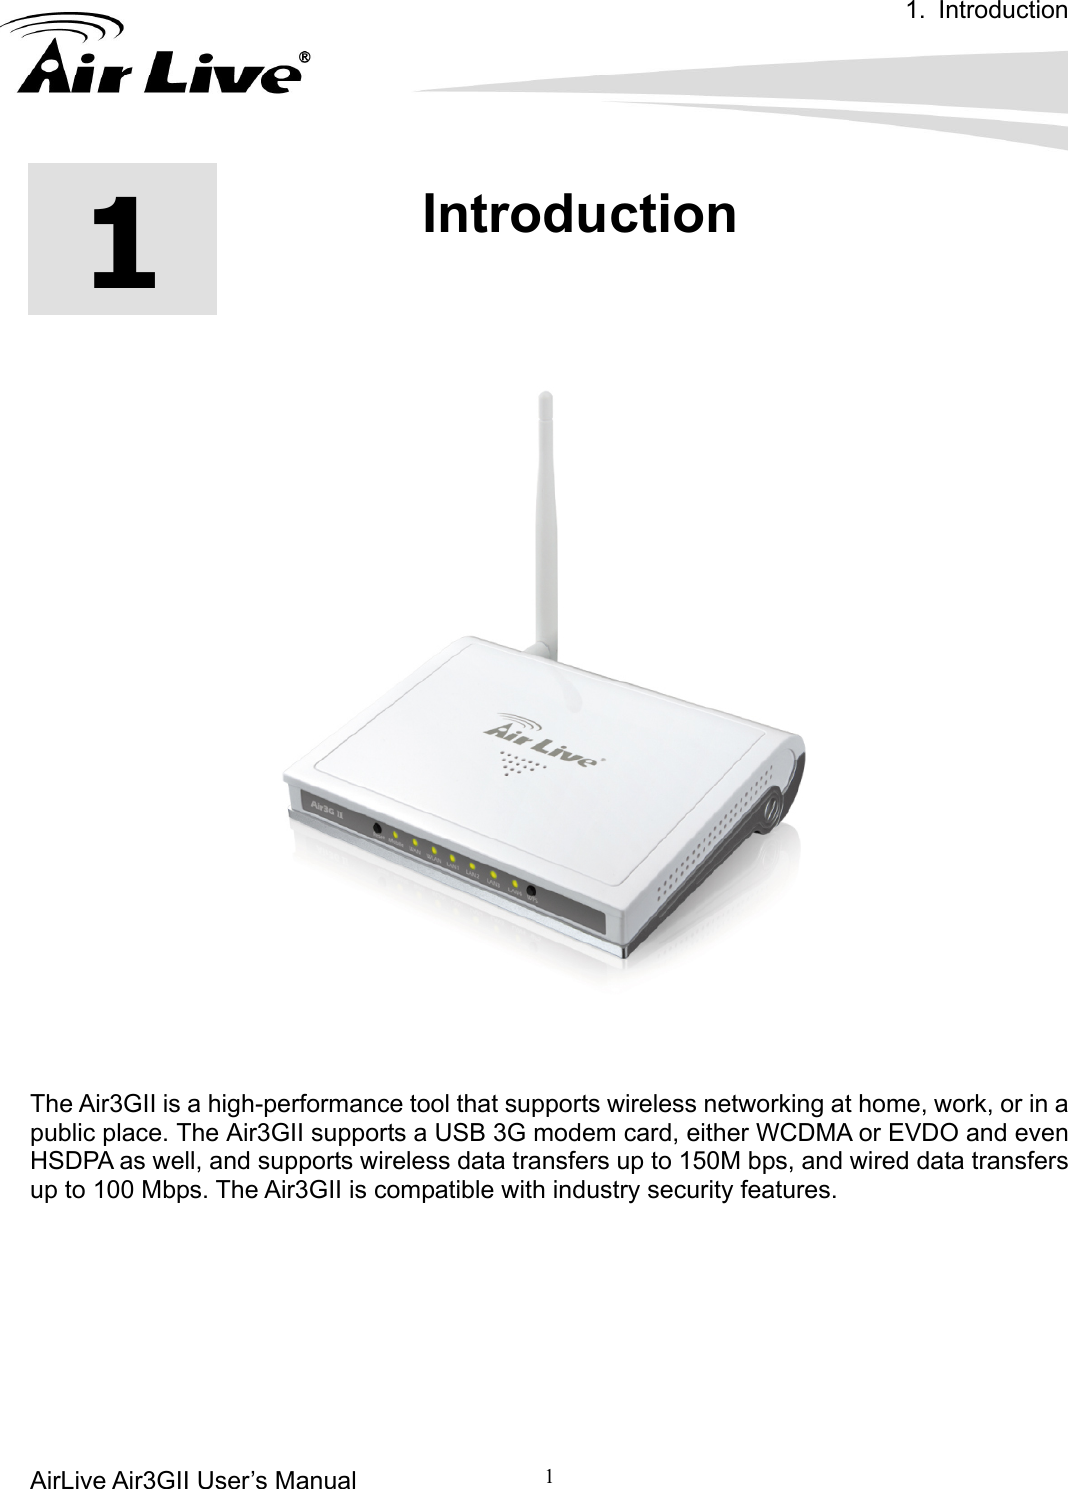 1. Introduction AirLive Air3GII User’s Manual         1      1  1.Introduction     The Air3GII is a high-performance tool that supports wireless networking at home, work, or in a public place. The Air3GII supports a USB 3G modem card, either WCDMA or EVDO and even HSDPA as well, and supports wireless data transfers up to 150M bps, and wired data transfers up to 100 Mbps. The Air3GII is compatible with industry security features.       